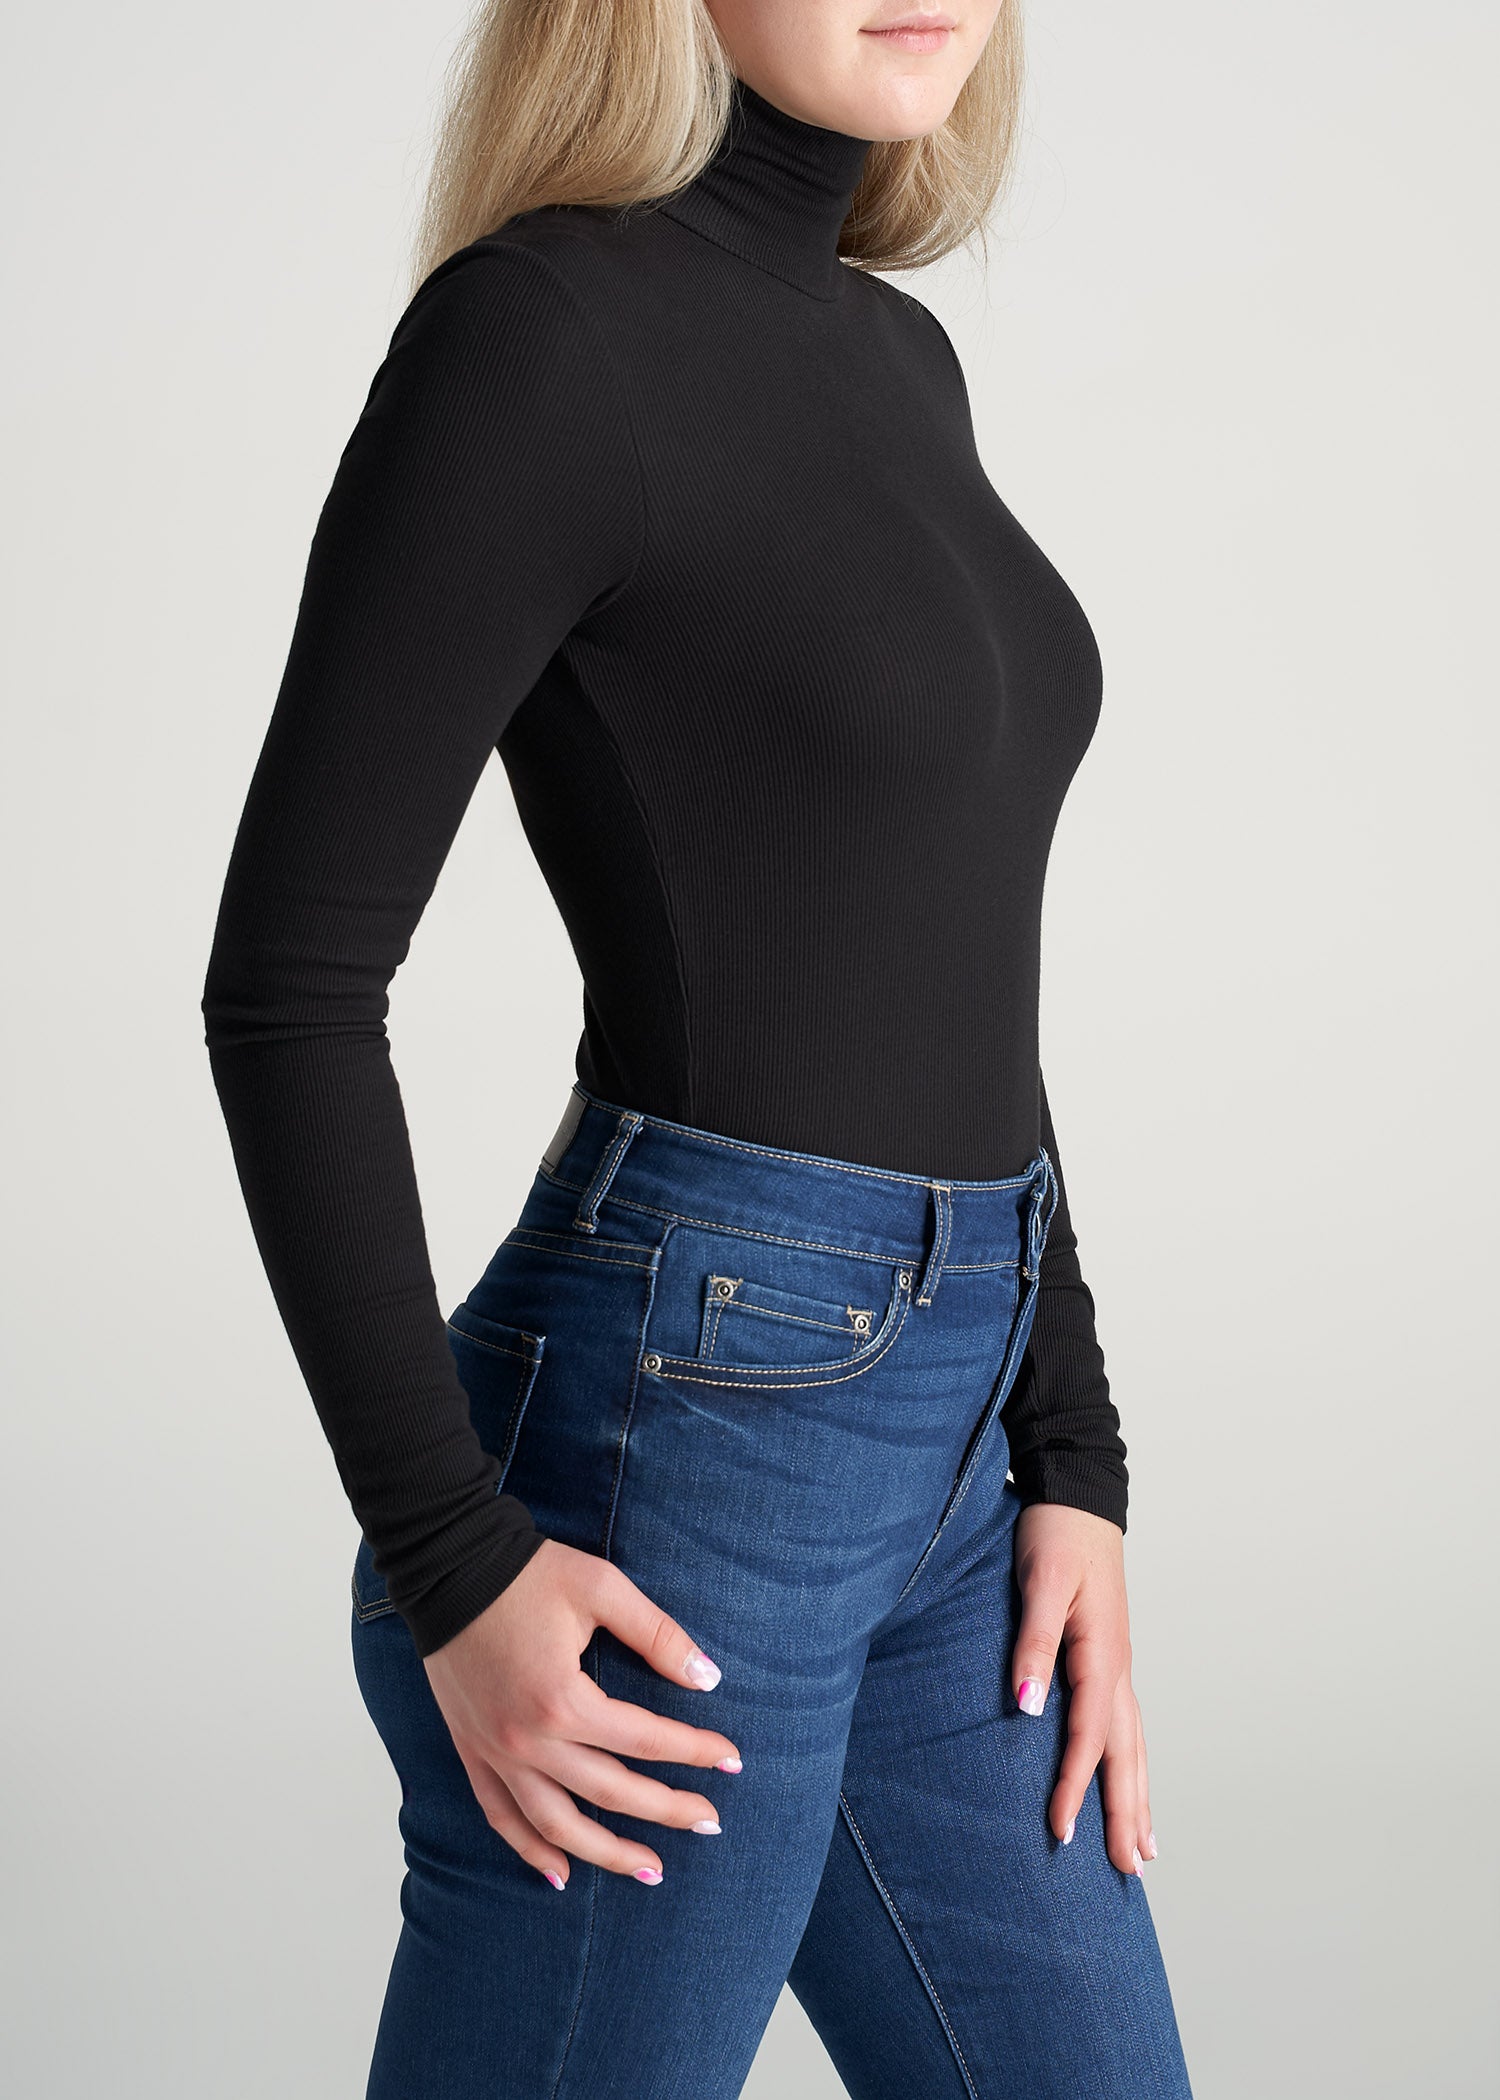 American-Tall-Women-Fitted-LongSleeve-Ribbed-TurtleNeck-Black-side